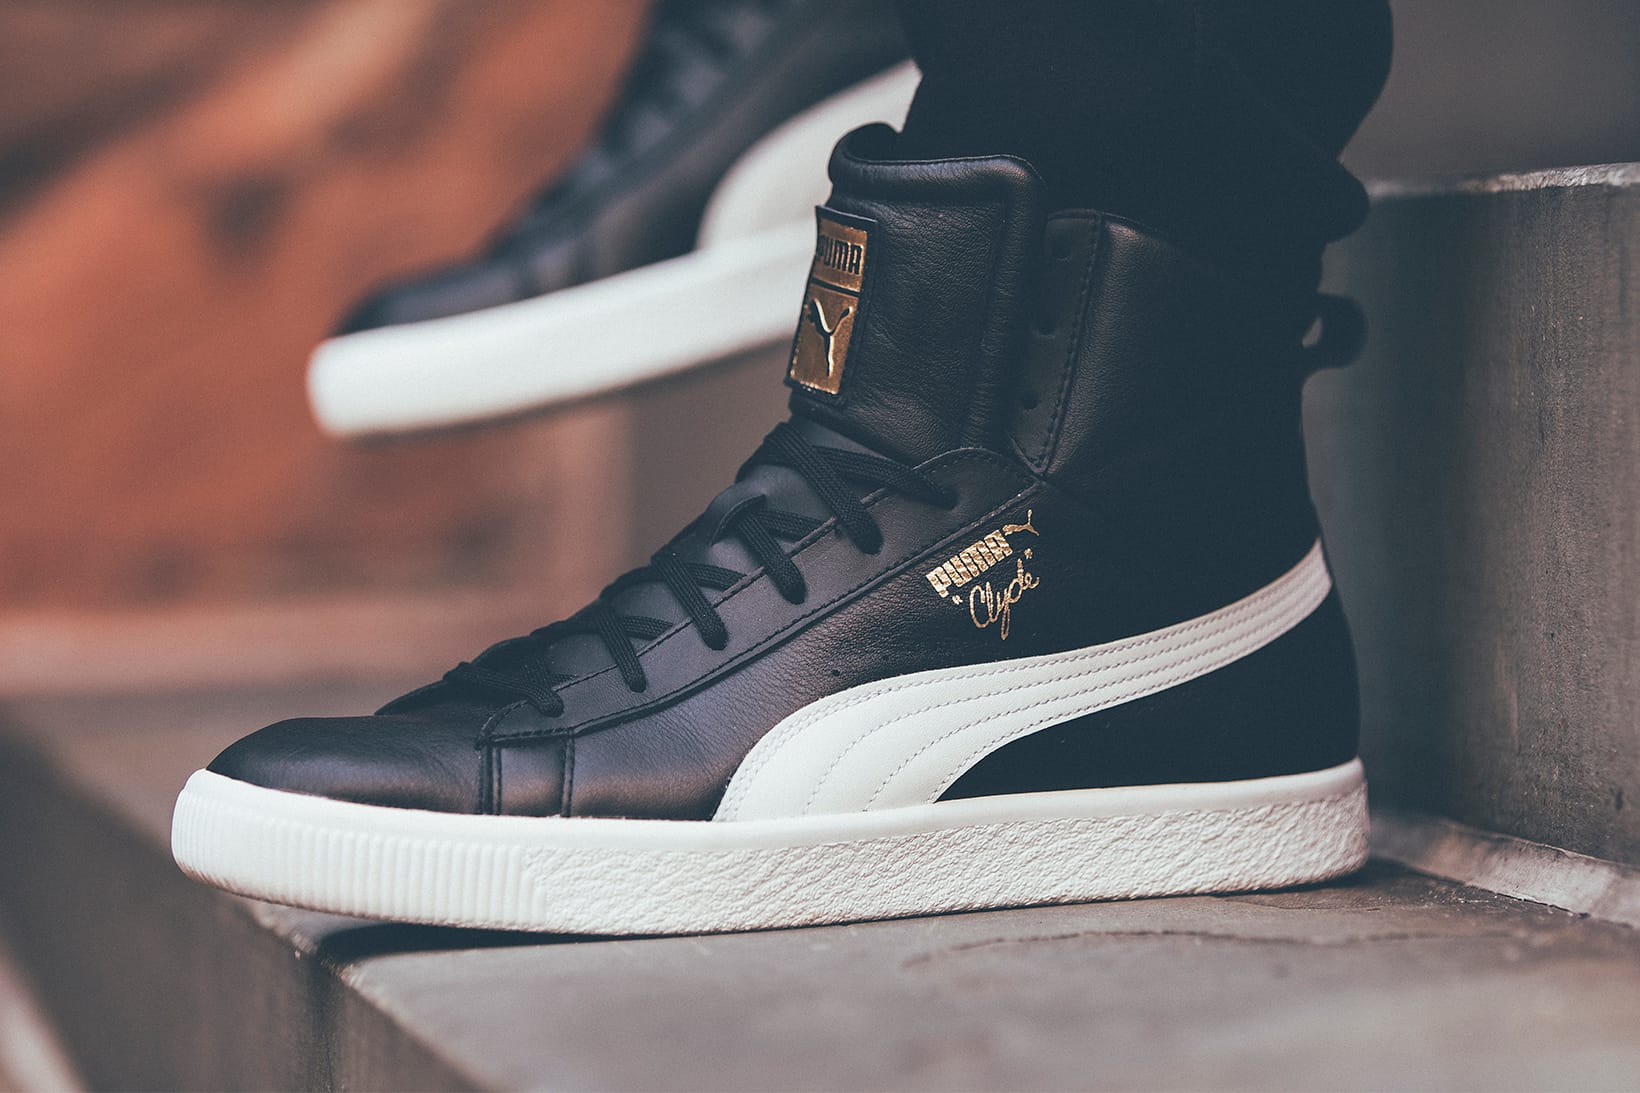 puma clyde black leather